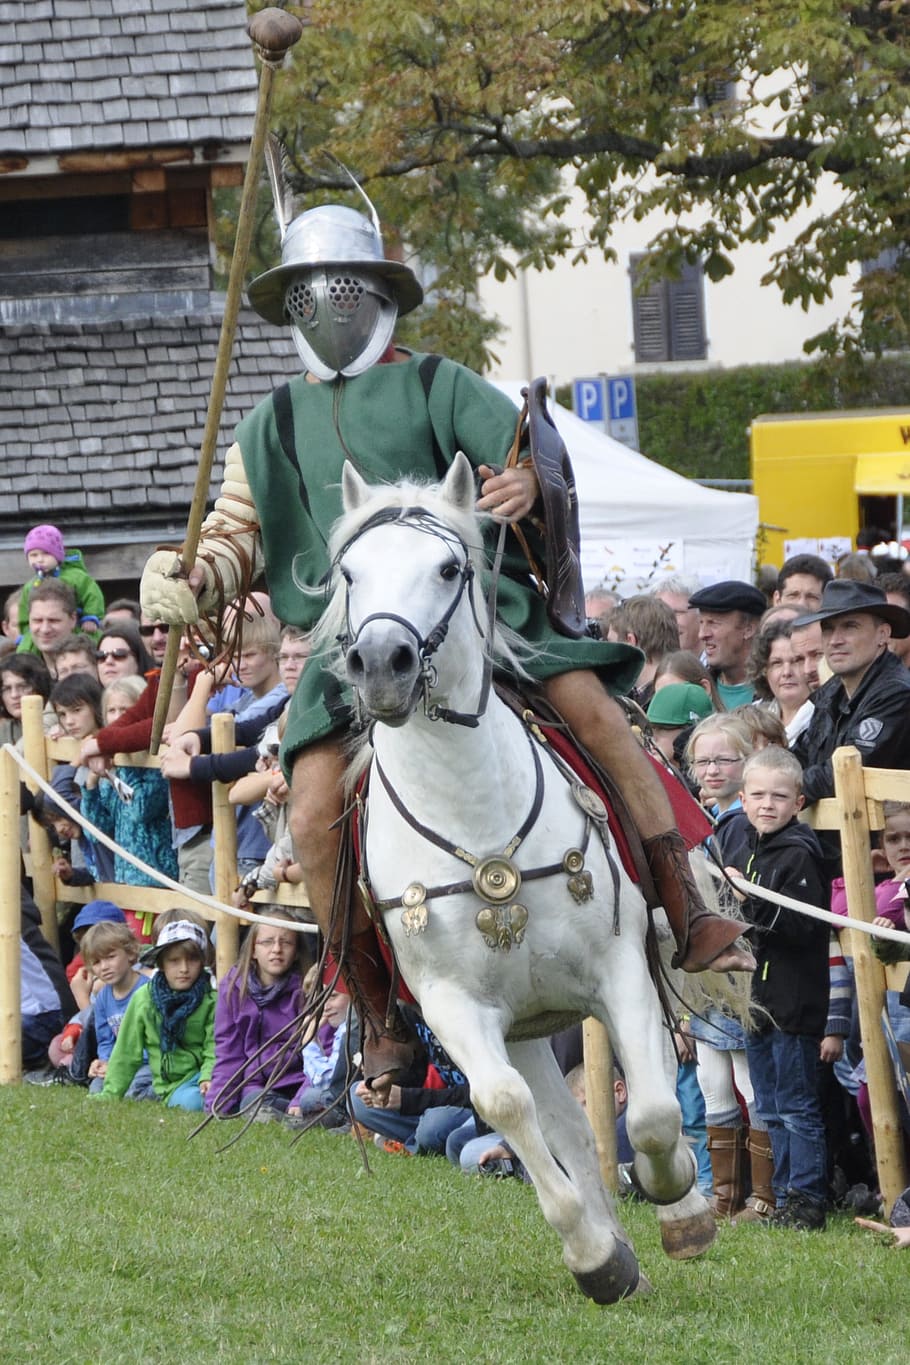 Romans, Reiter, Fighter, Horse, Mask, cavalry, people, sport, only men, adult